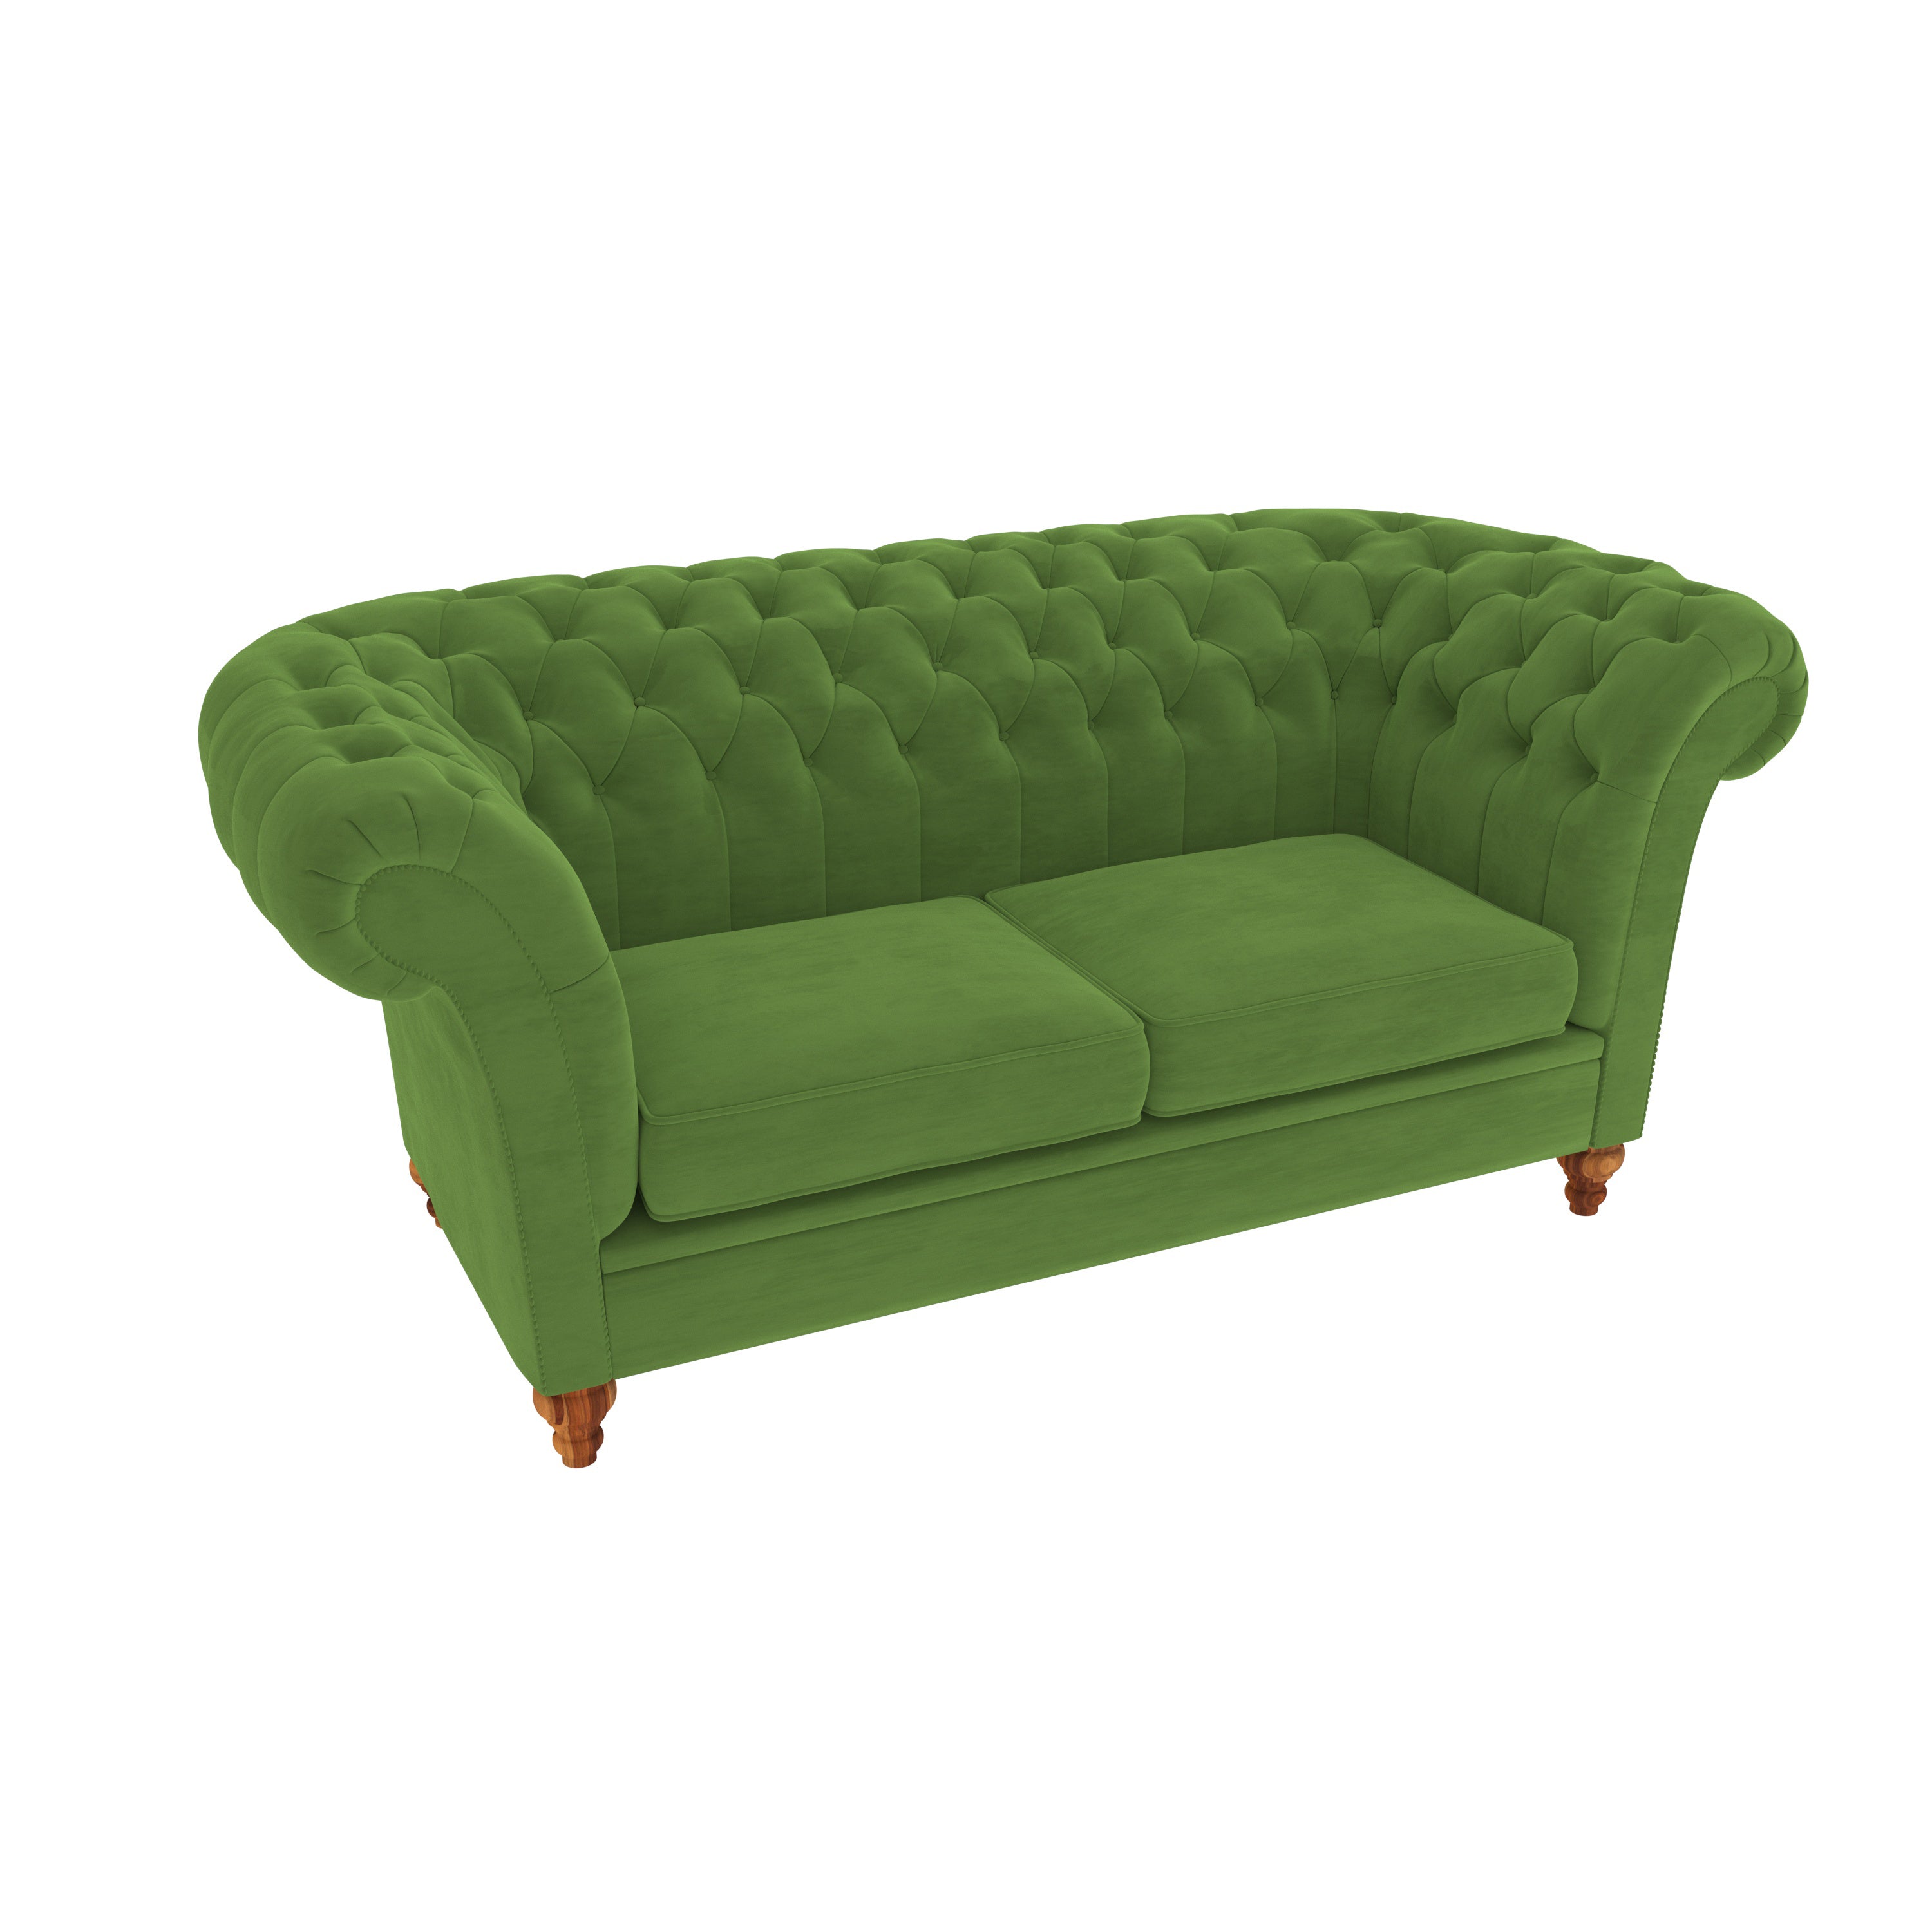 Parmanent Green Pastel Coloured Comfort Large 2 Seater Sofa for Home Sofa